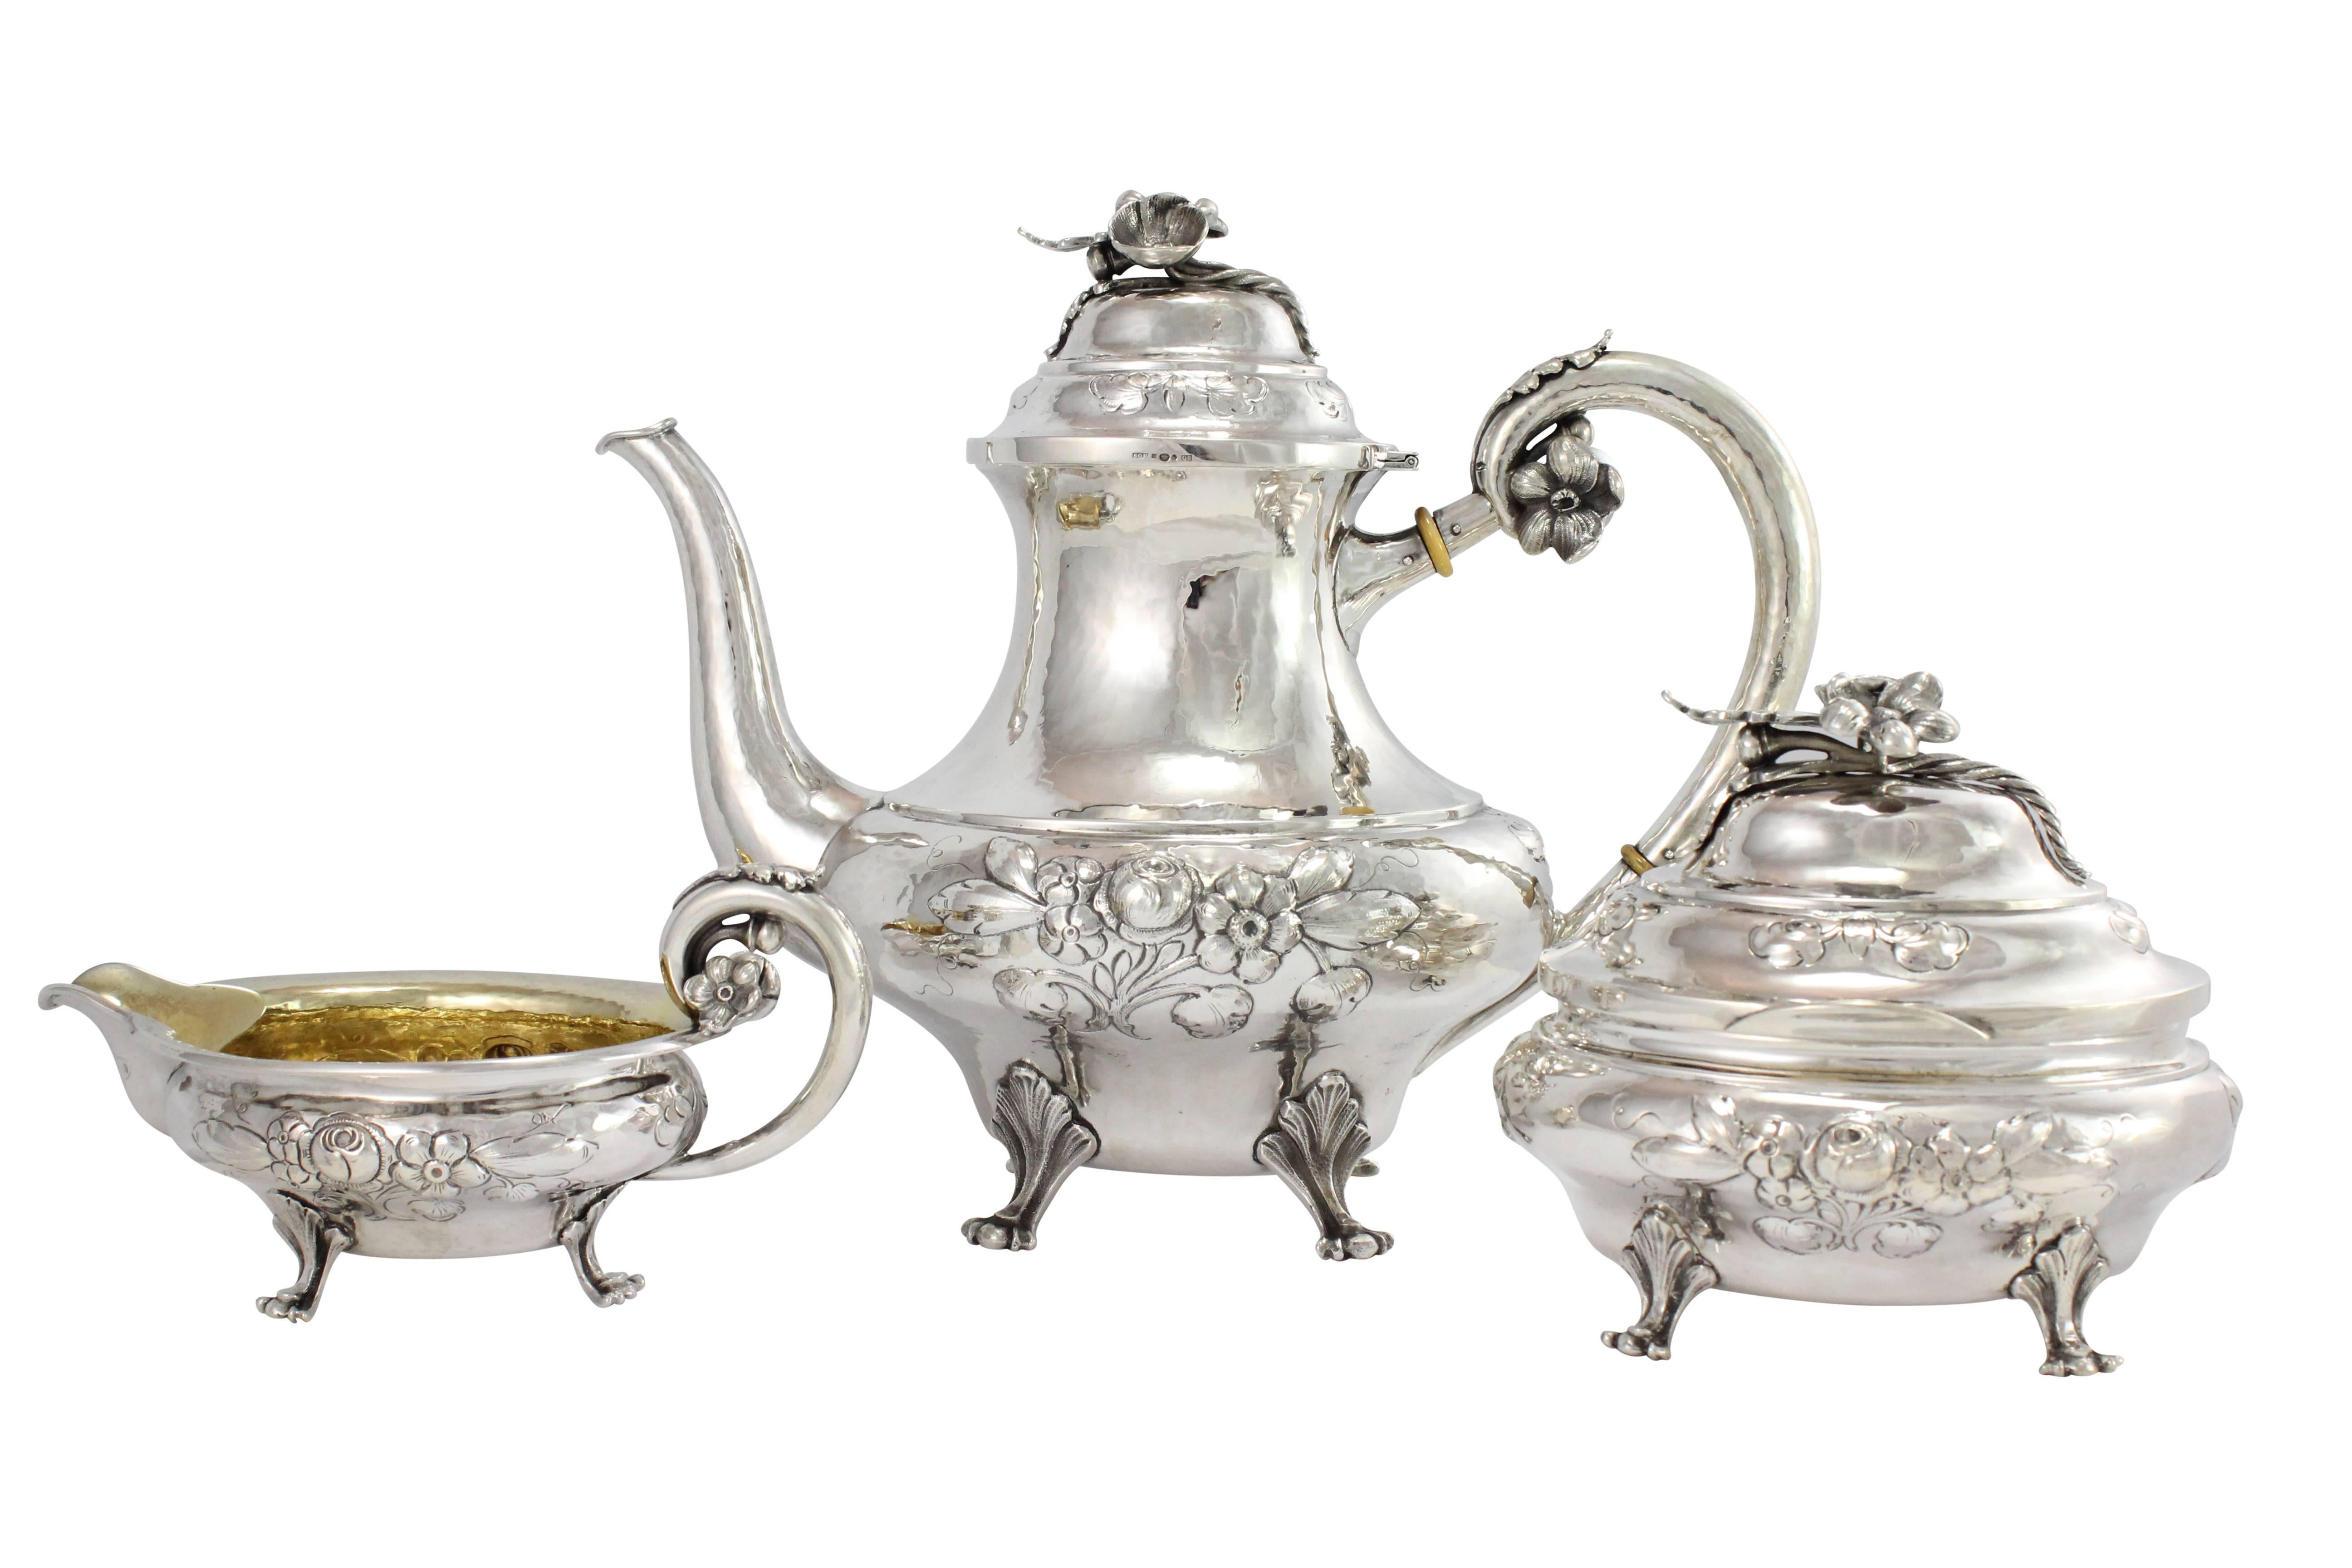 Originating from Skelleftea, Sweden in the 1930s this sterling silver coffee set by maker Svenska Guldsmedsbolaget H Jonsson, features a repousse motif on all three pieces. The set consists of a coffee pot, sugar bowl and creamer.

Measure: Pot: H